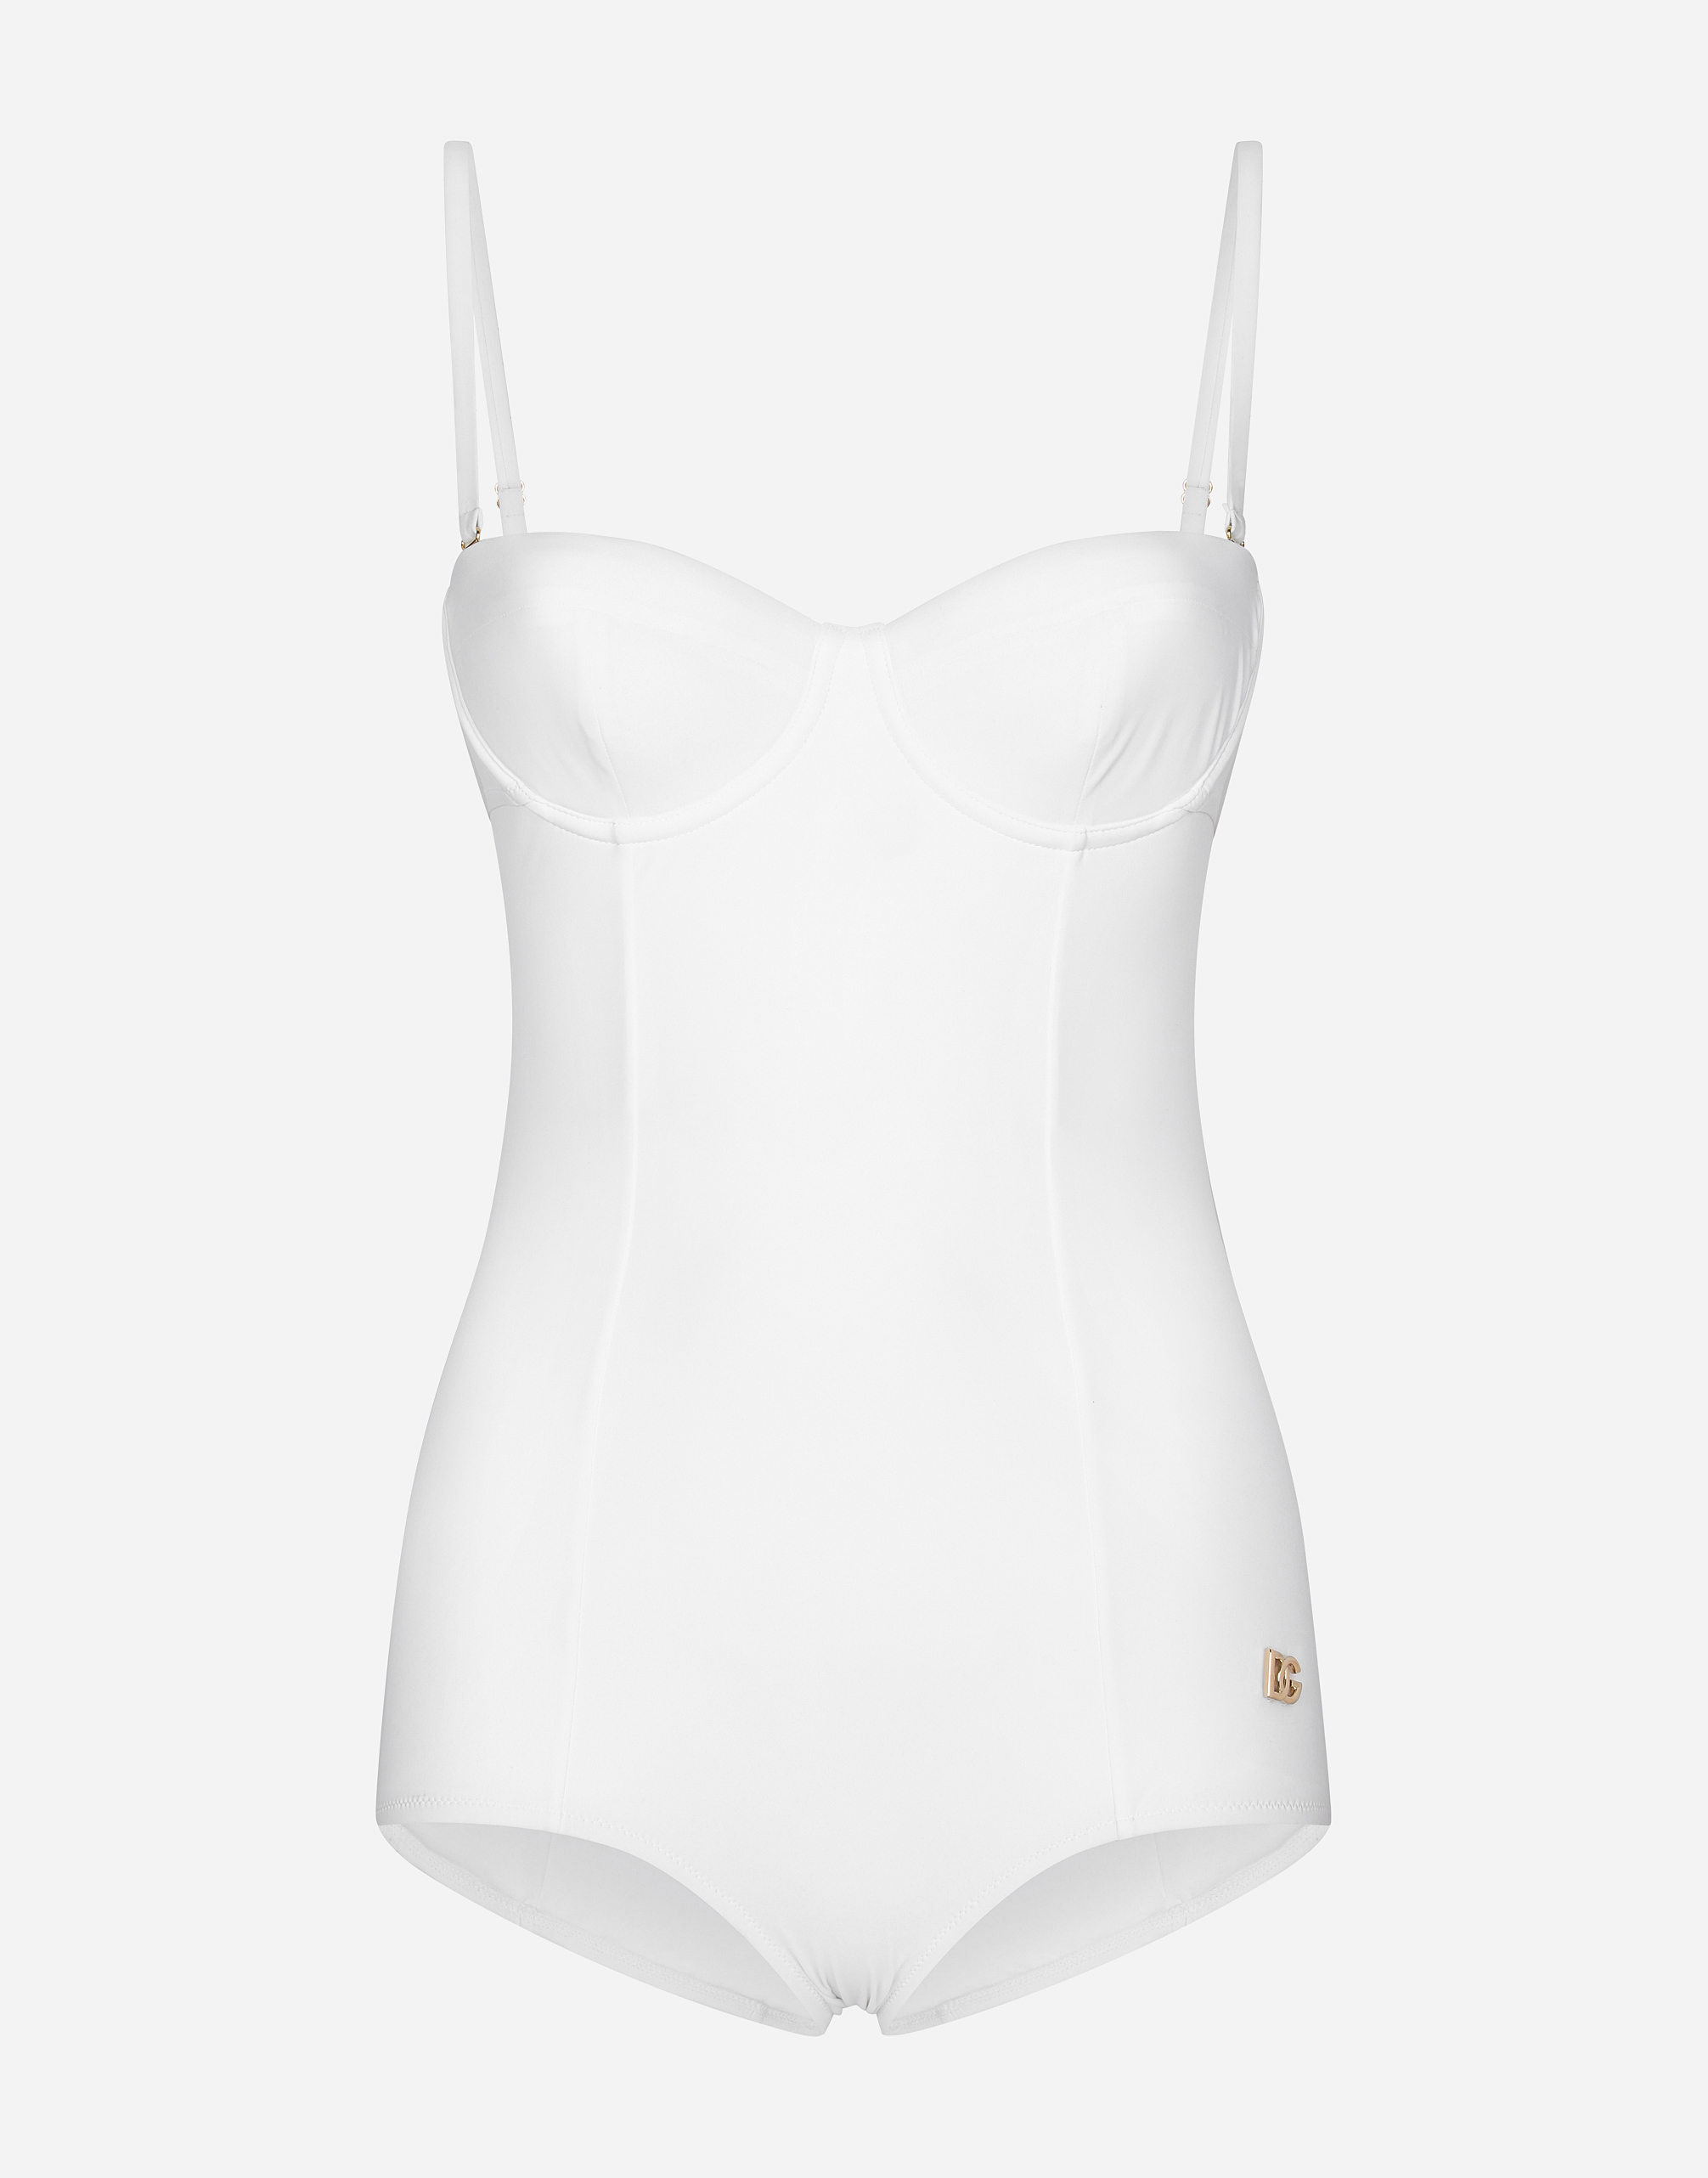 Balconette one-piece swimsuit in White